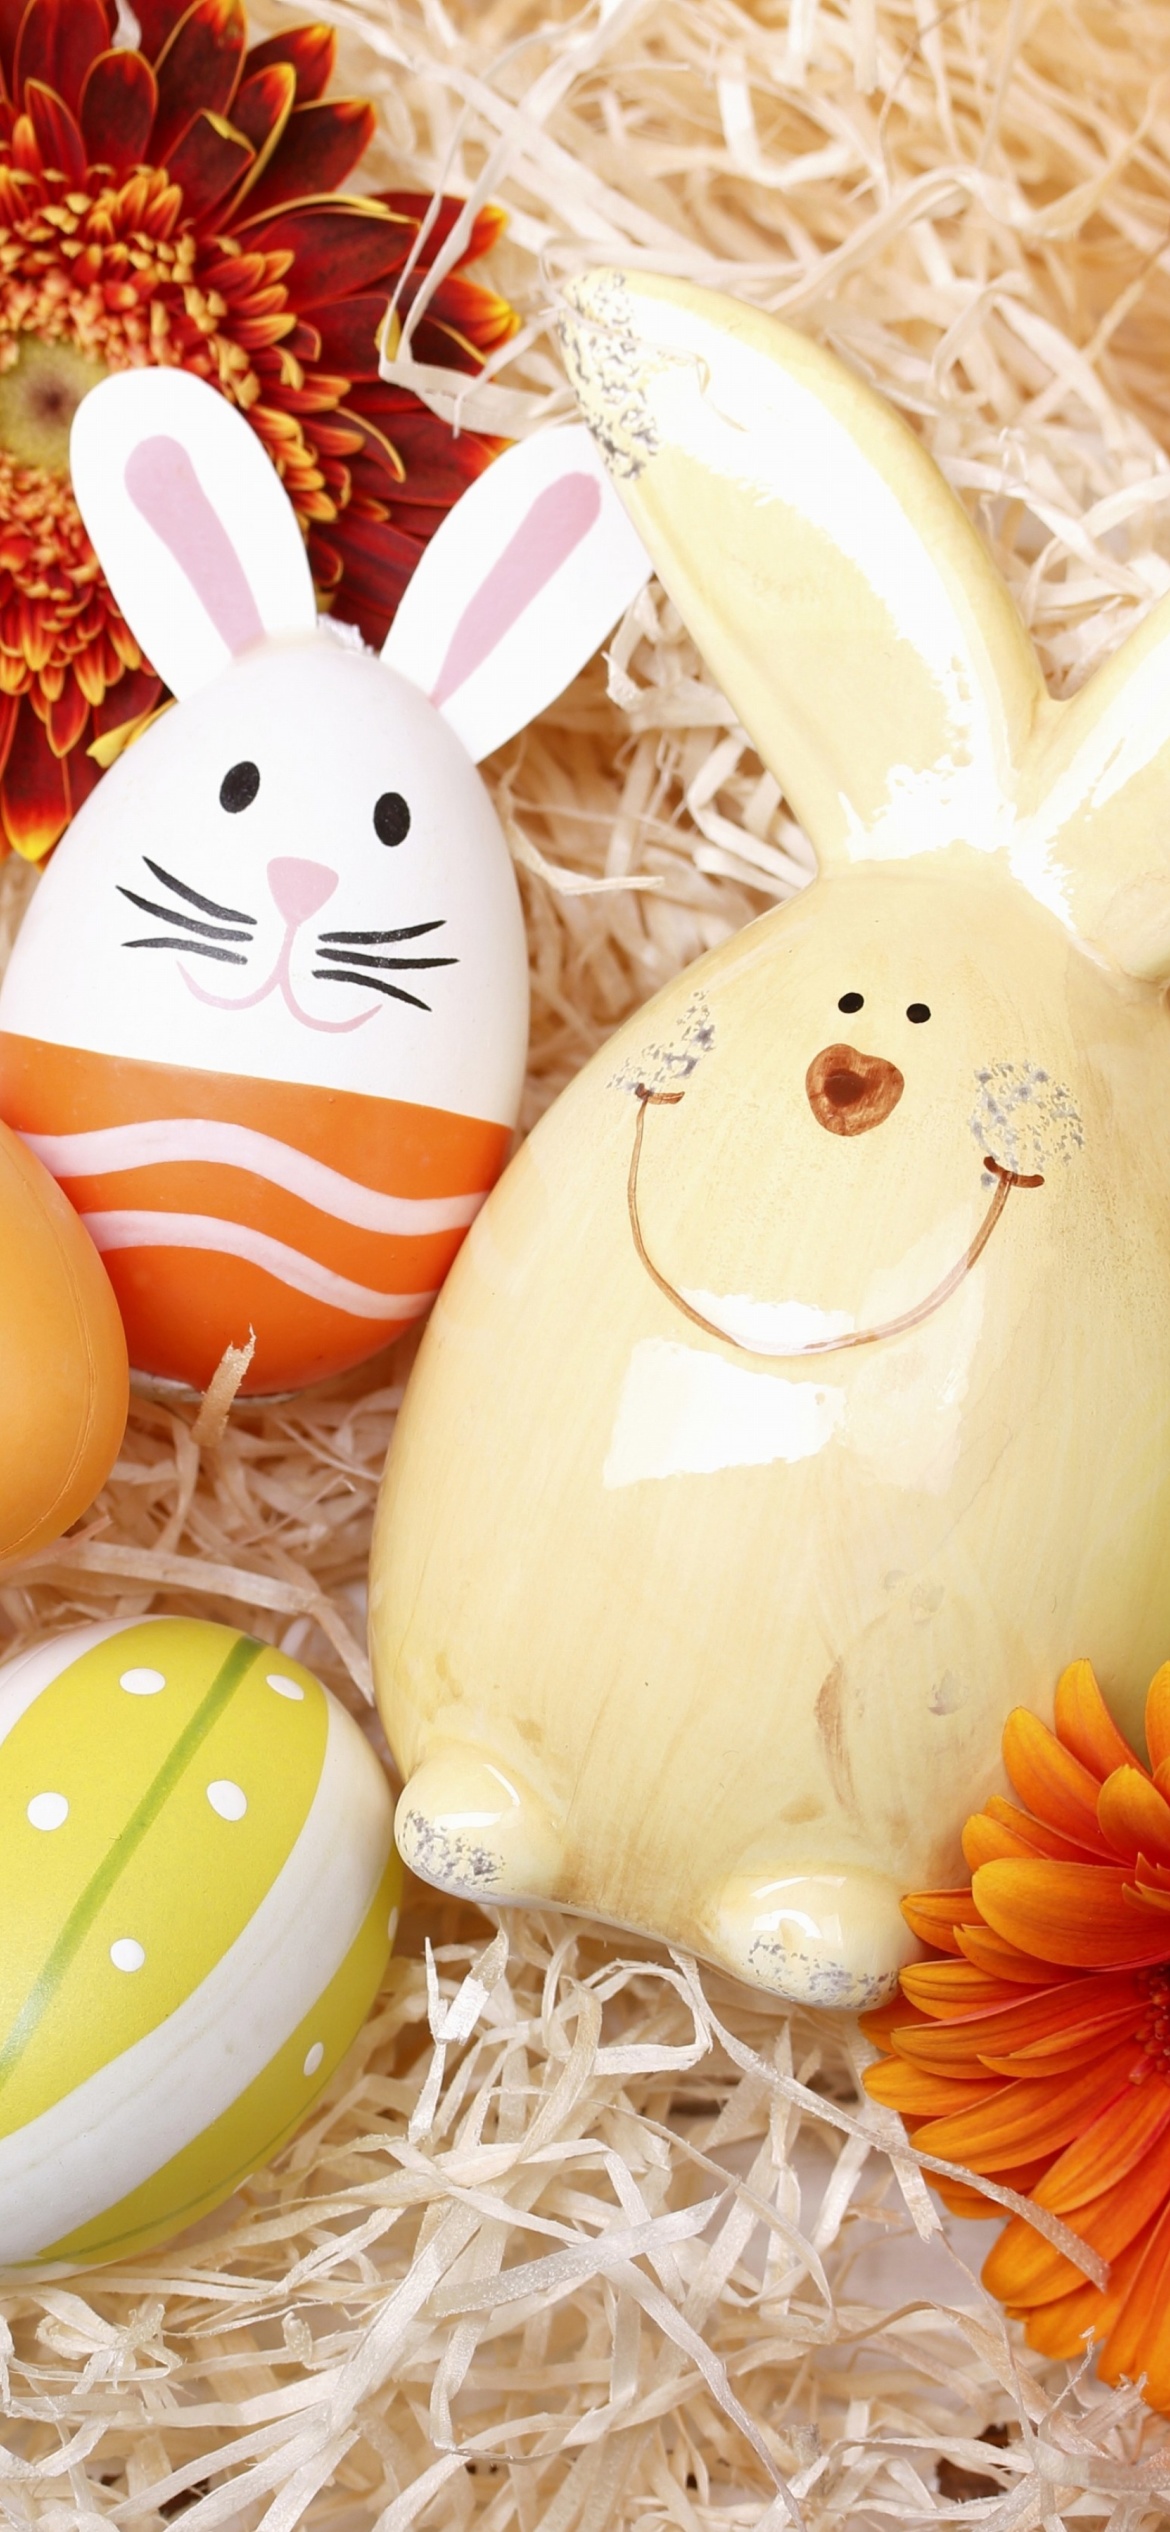 Sfondi Easter Eggs Decoration with Hare 1170x2532